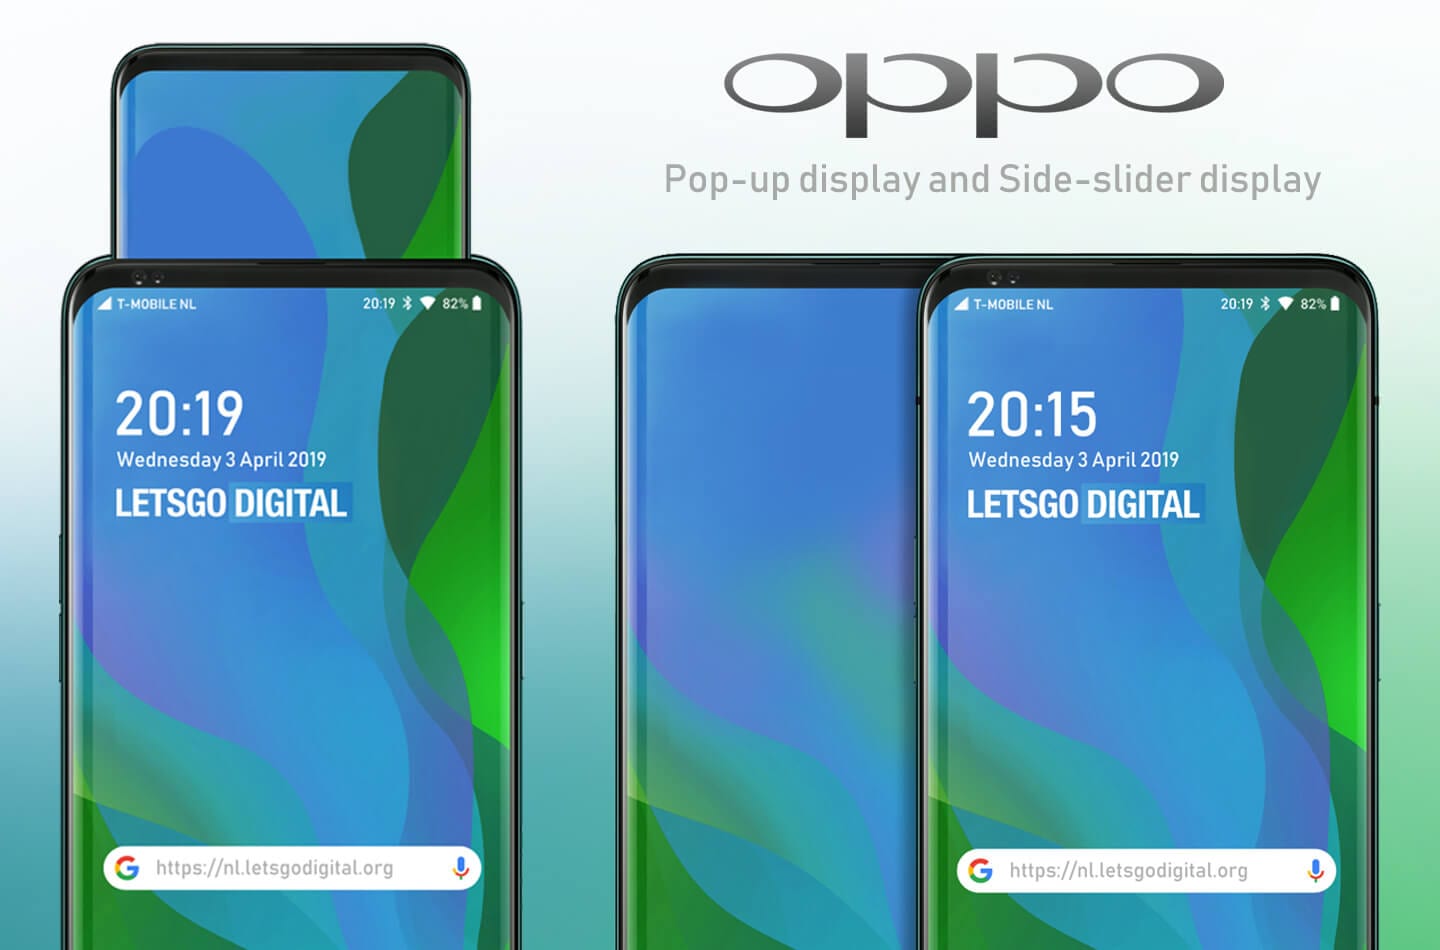 Oppo patents two mobile phone